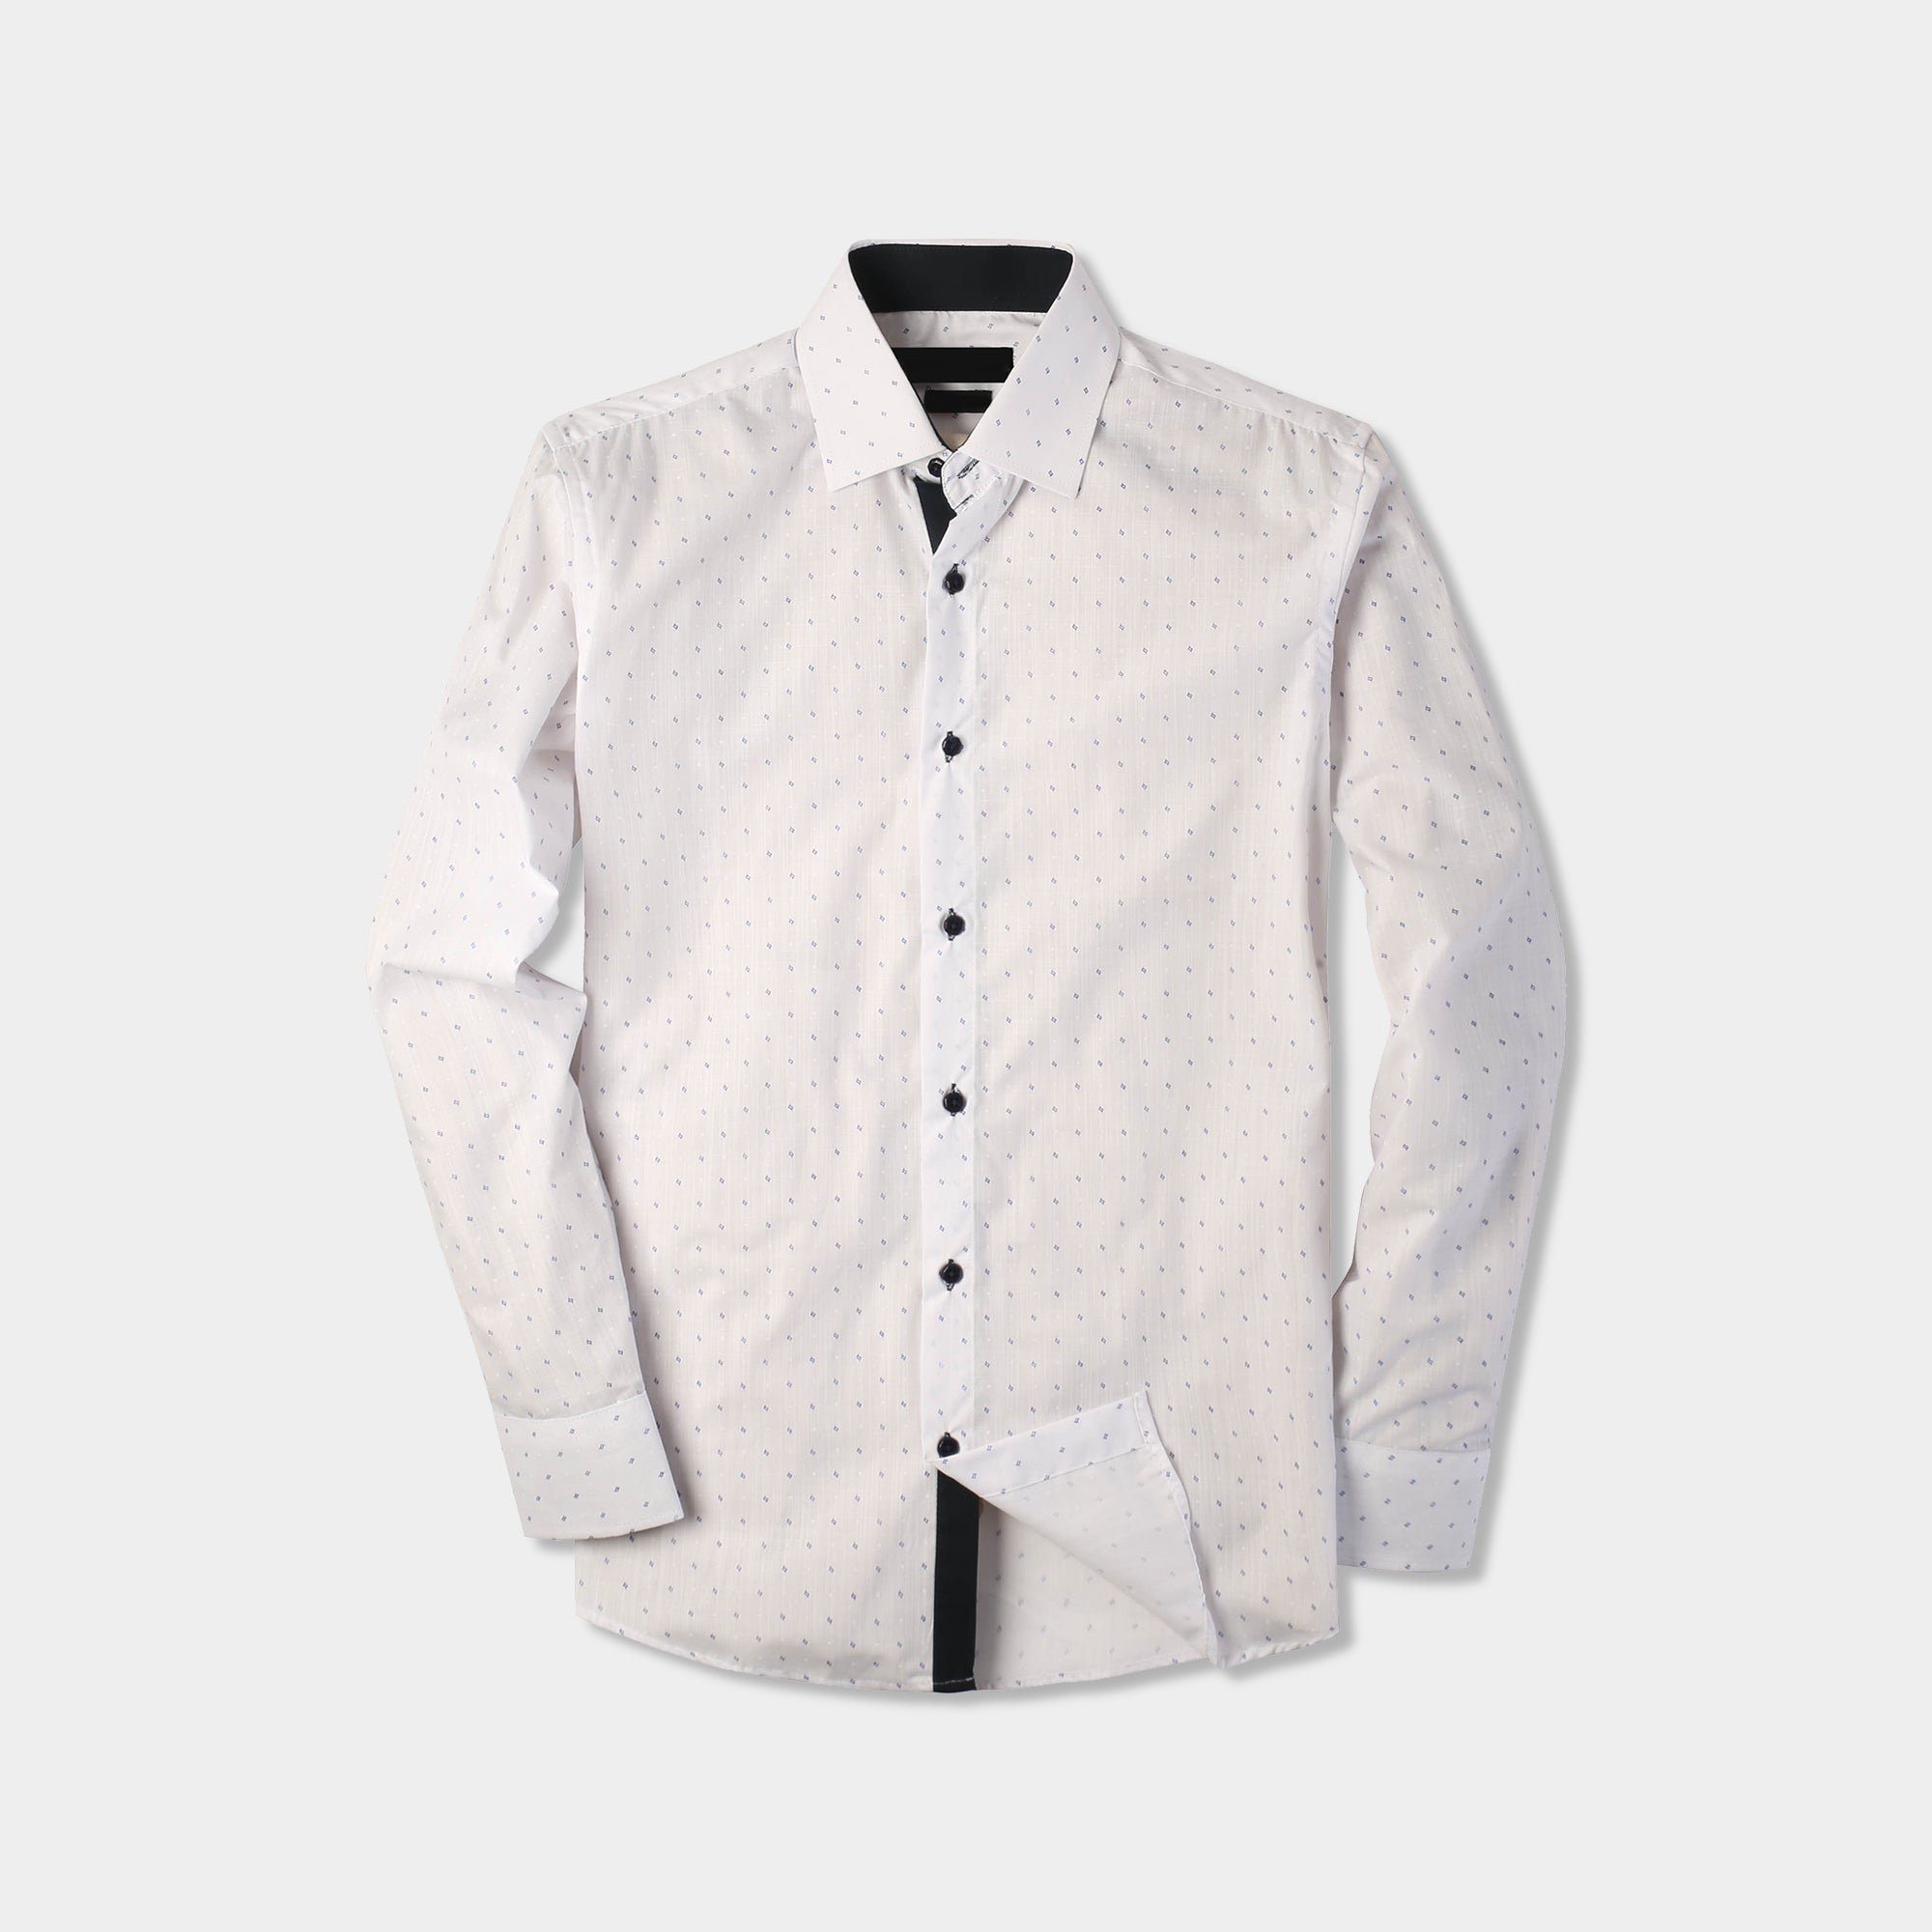 classic shirts_formal shirts_formal shirts for men_formal clothes for men_button down shirt_button down_mens long sleeve button down_White Dot